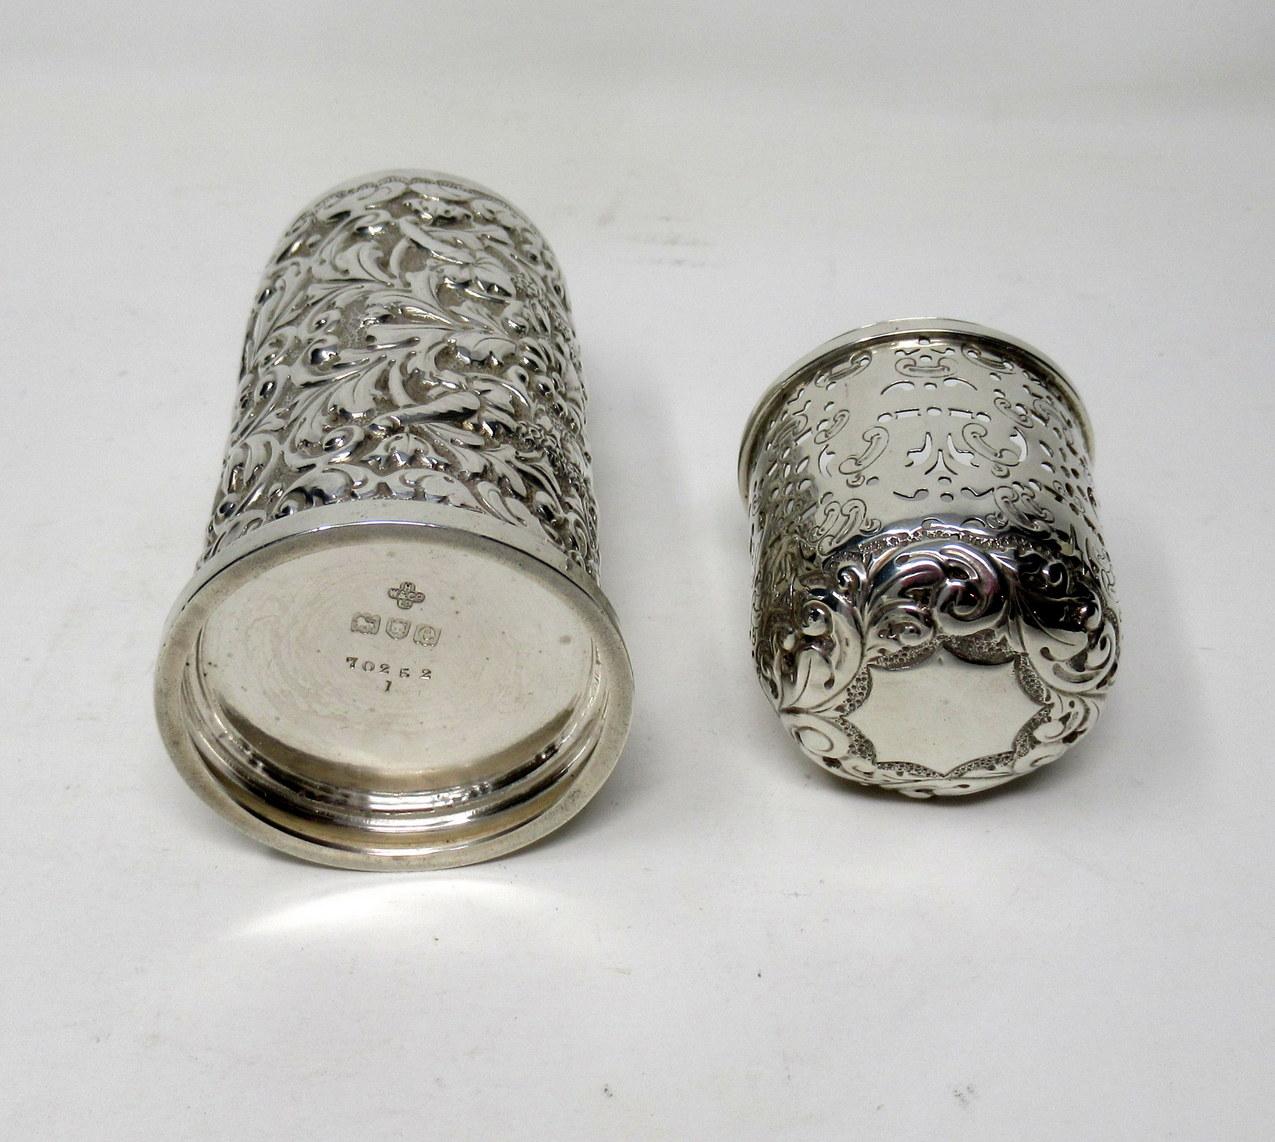 English Sterling Silver Sugar Caster Shaker Muffineer Horace Woodward 1900. 4.3ozs For Sale